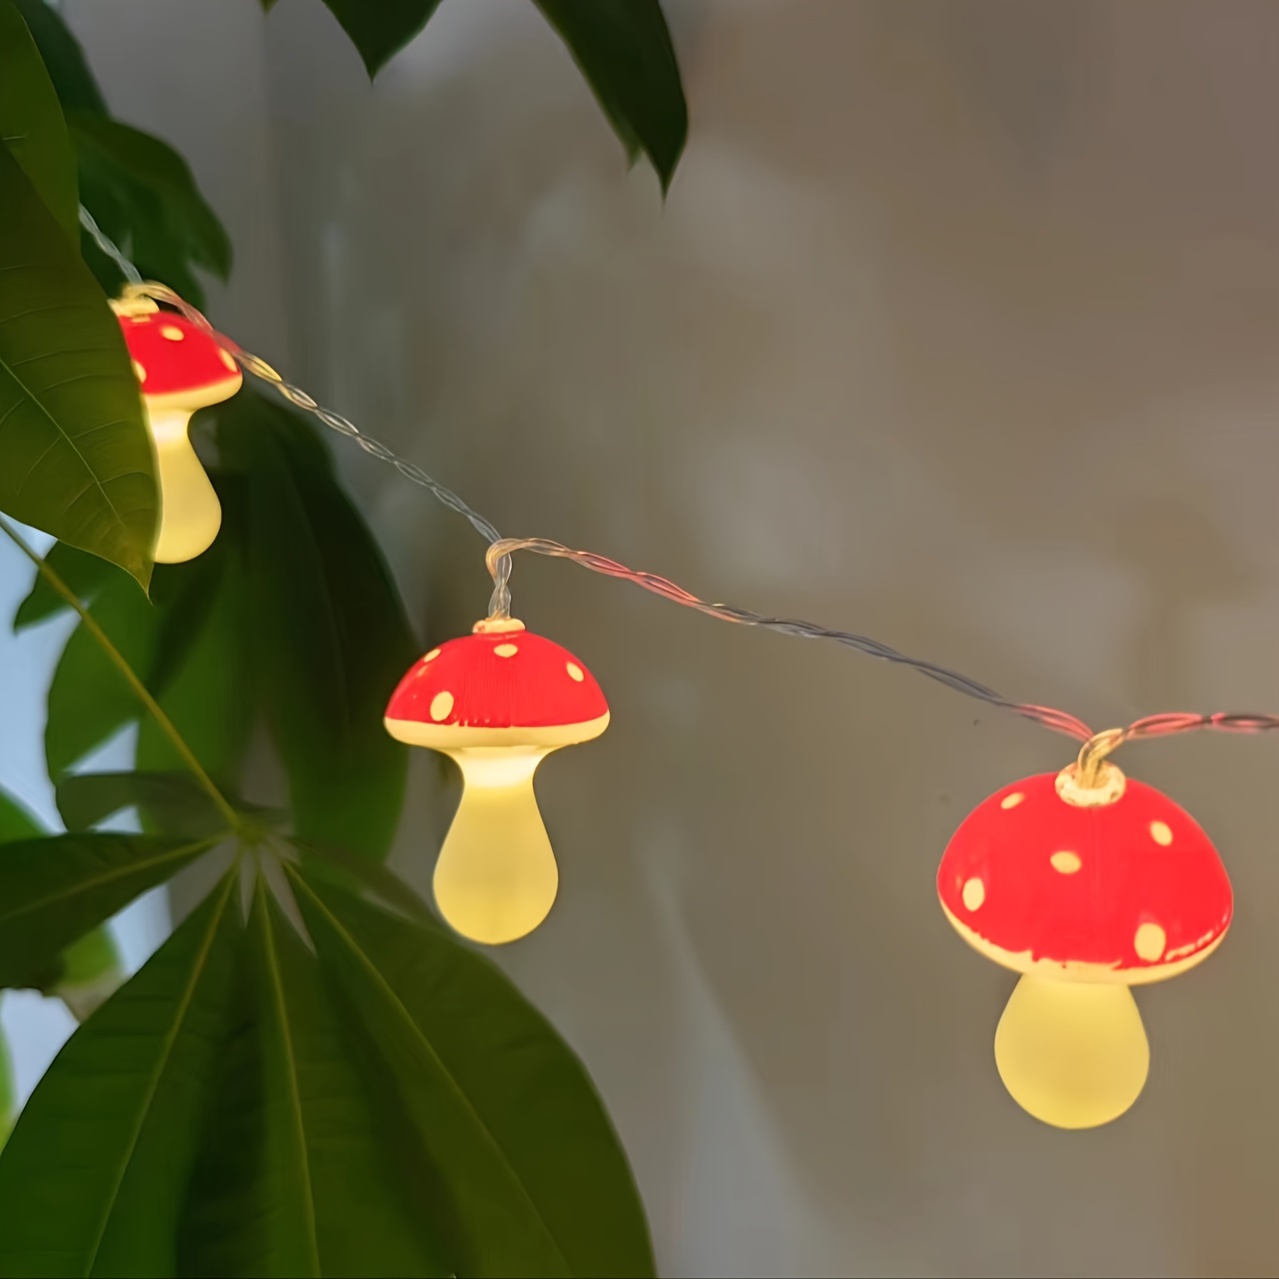 

1pc Festive Led Mushroom String Light, Indoor Colorful Lighting Decoration For Garden, Patio, And Outdoor Camping